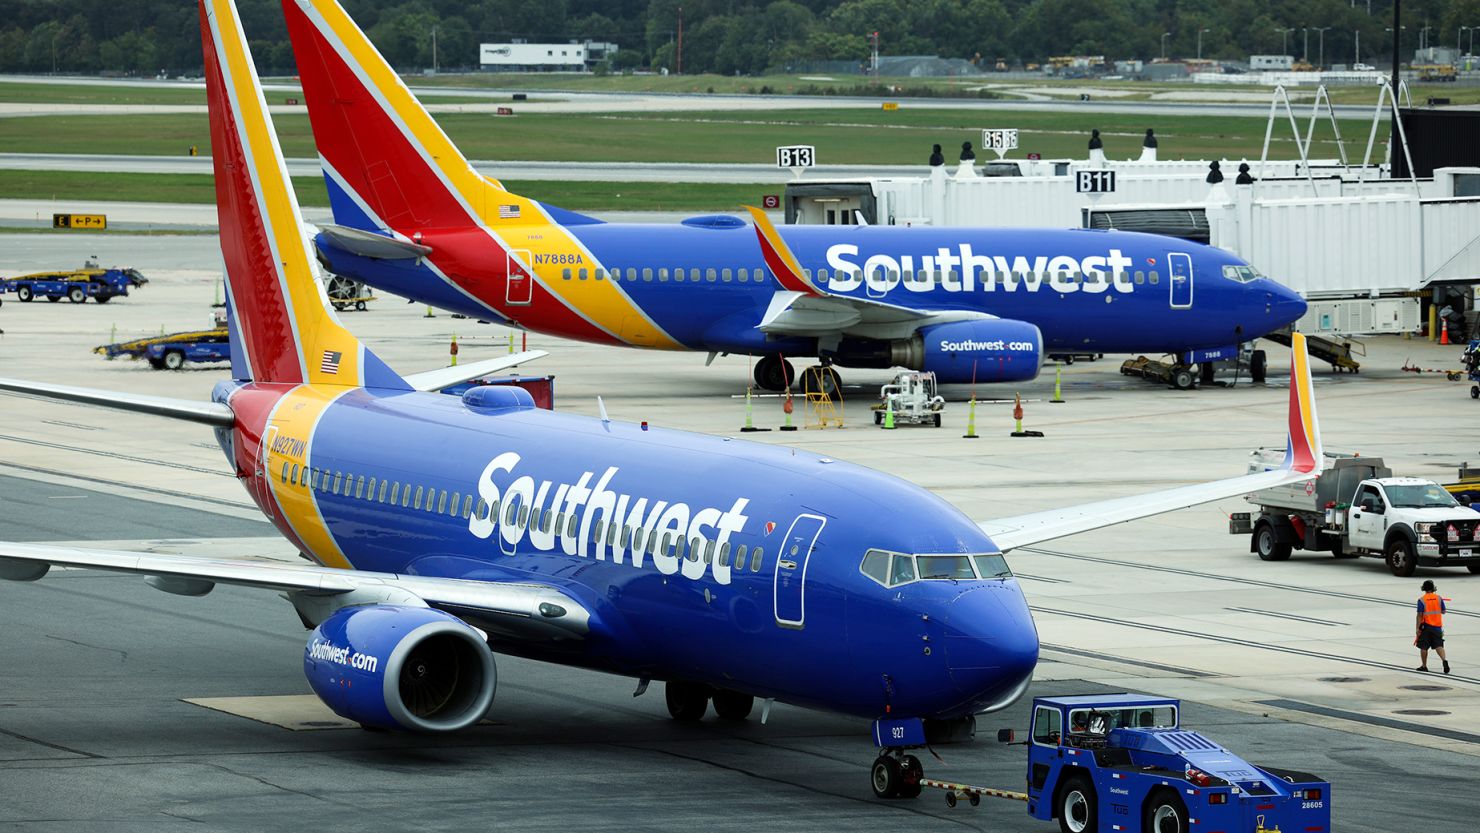 Recent social media posts have brought new attention to Southwest Airlines' "customer of size" policy.